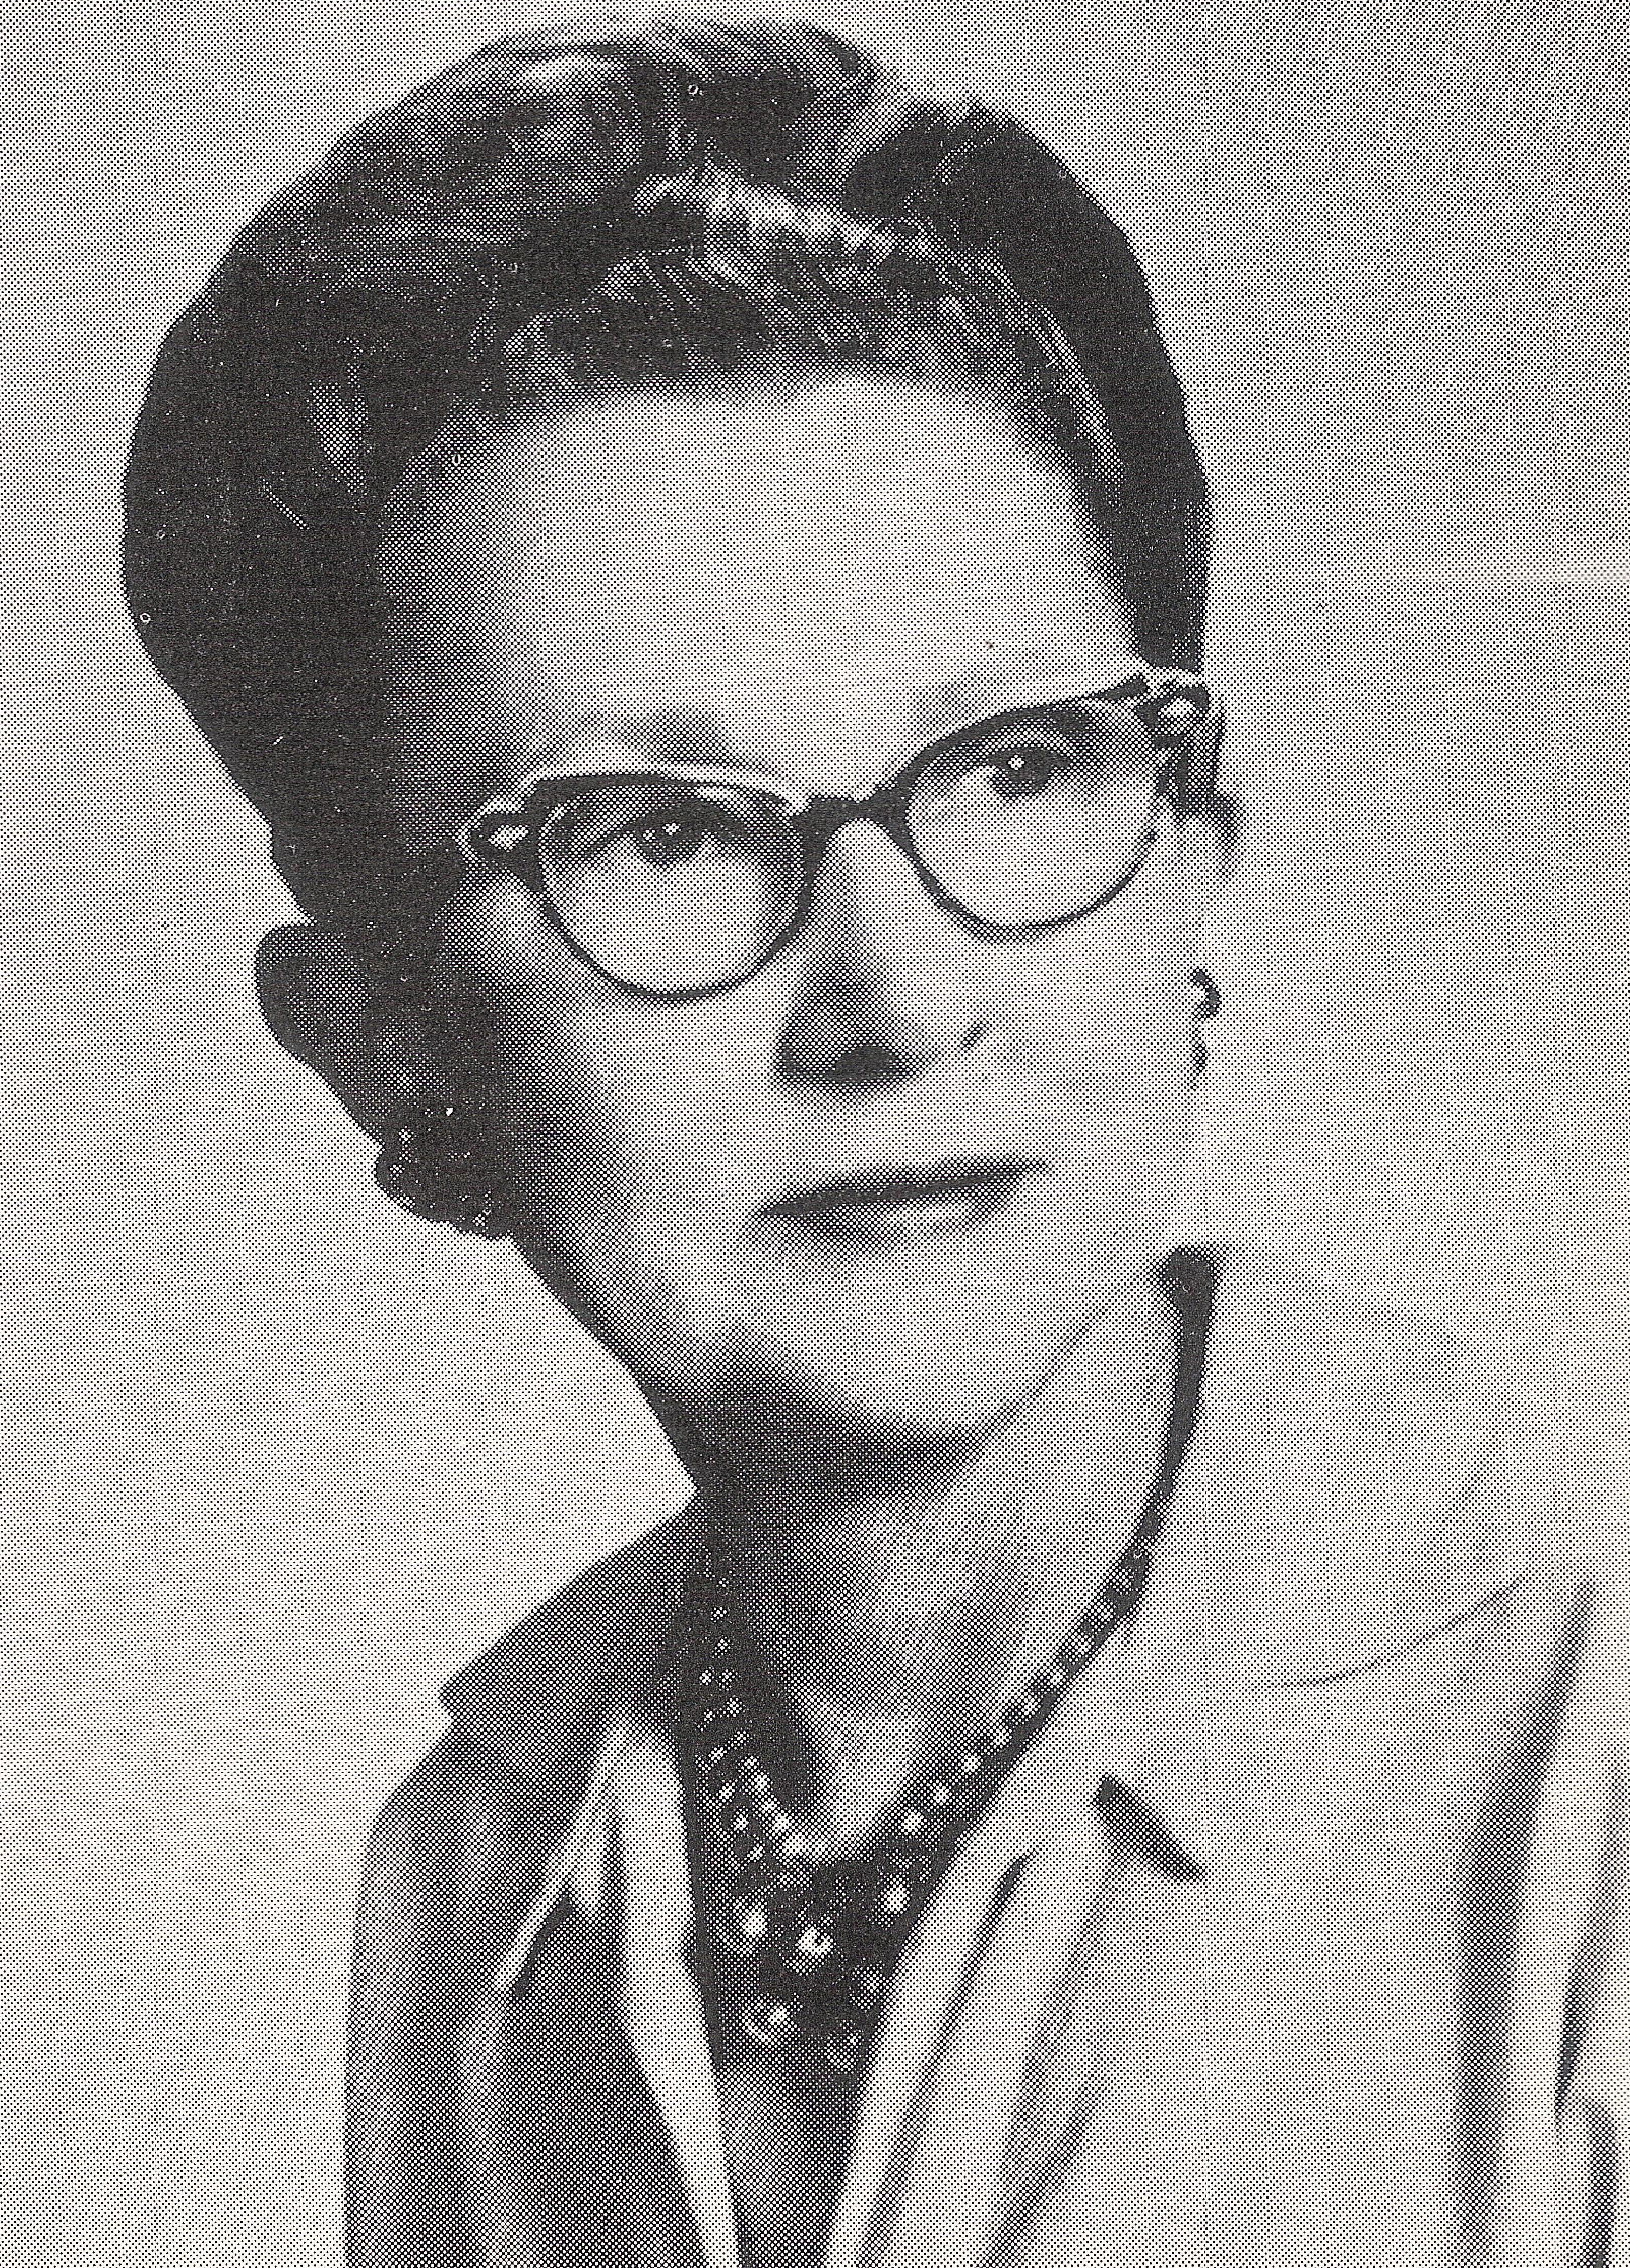 Photo of Theresa Folger taken from the 1958 Fairview yearbook.